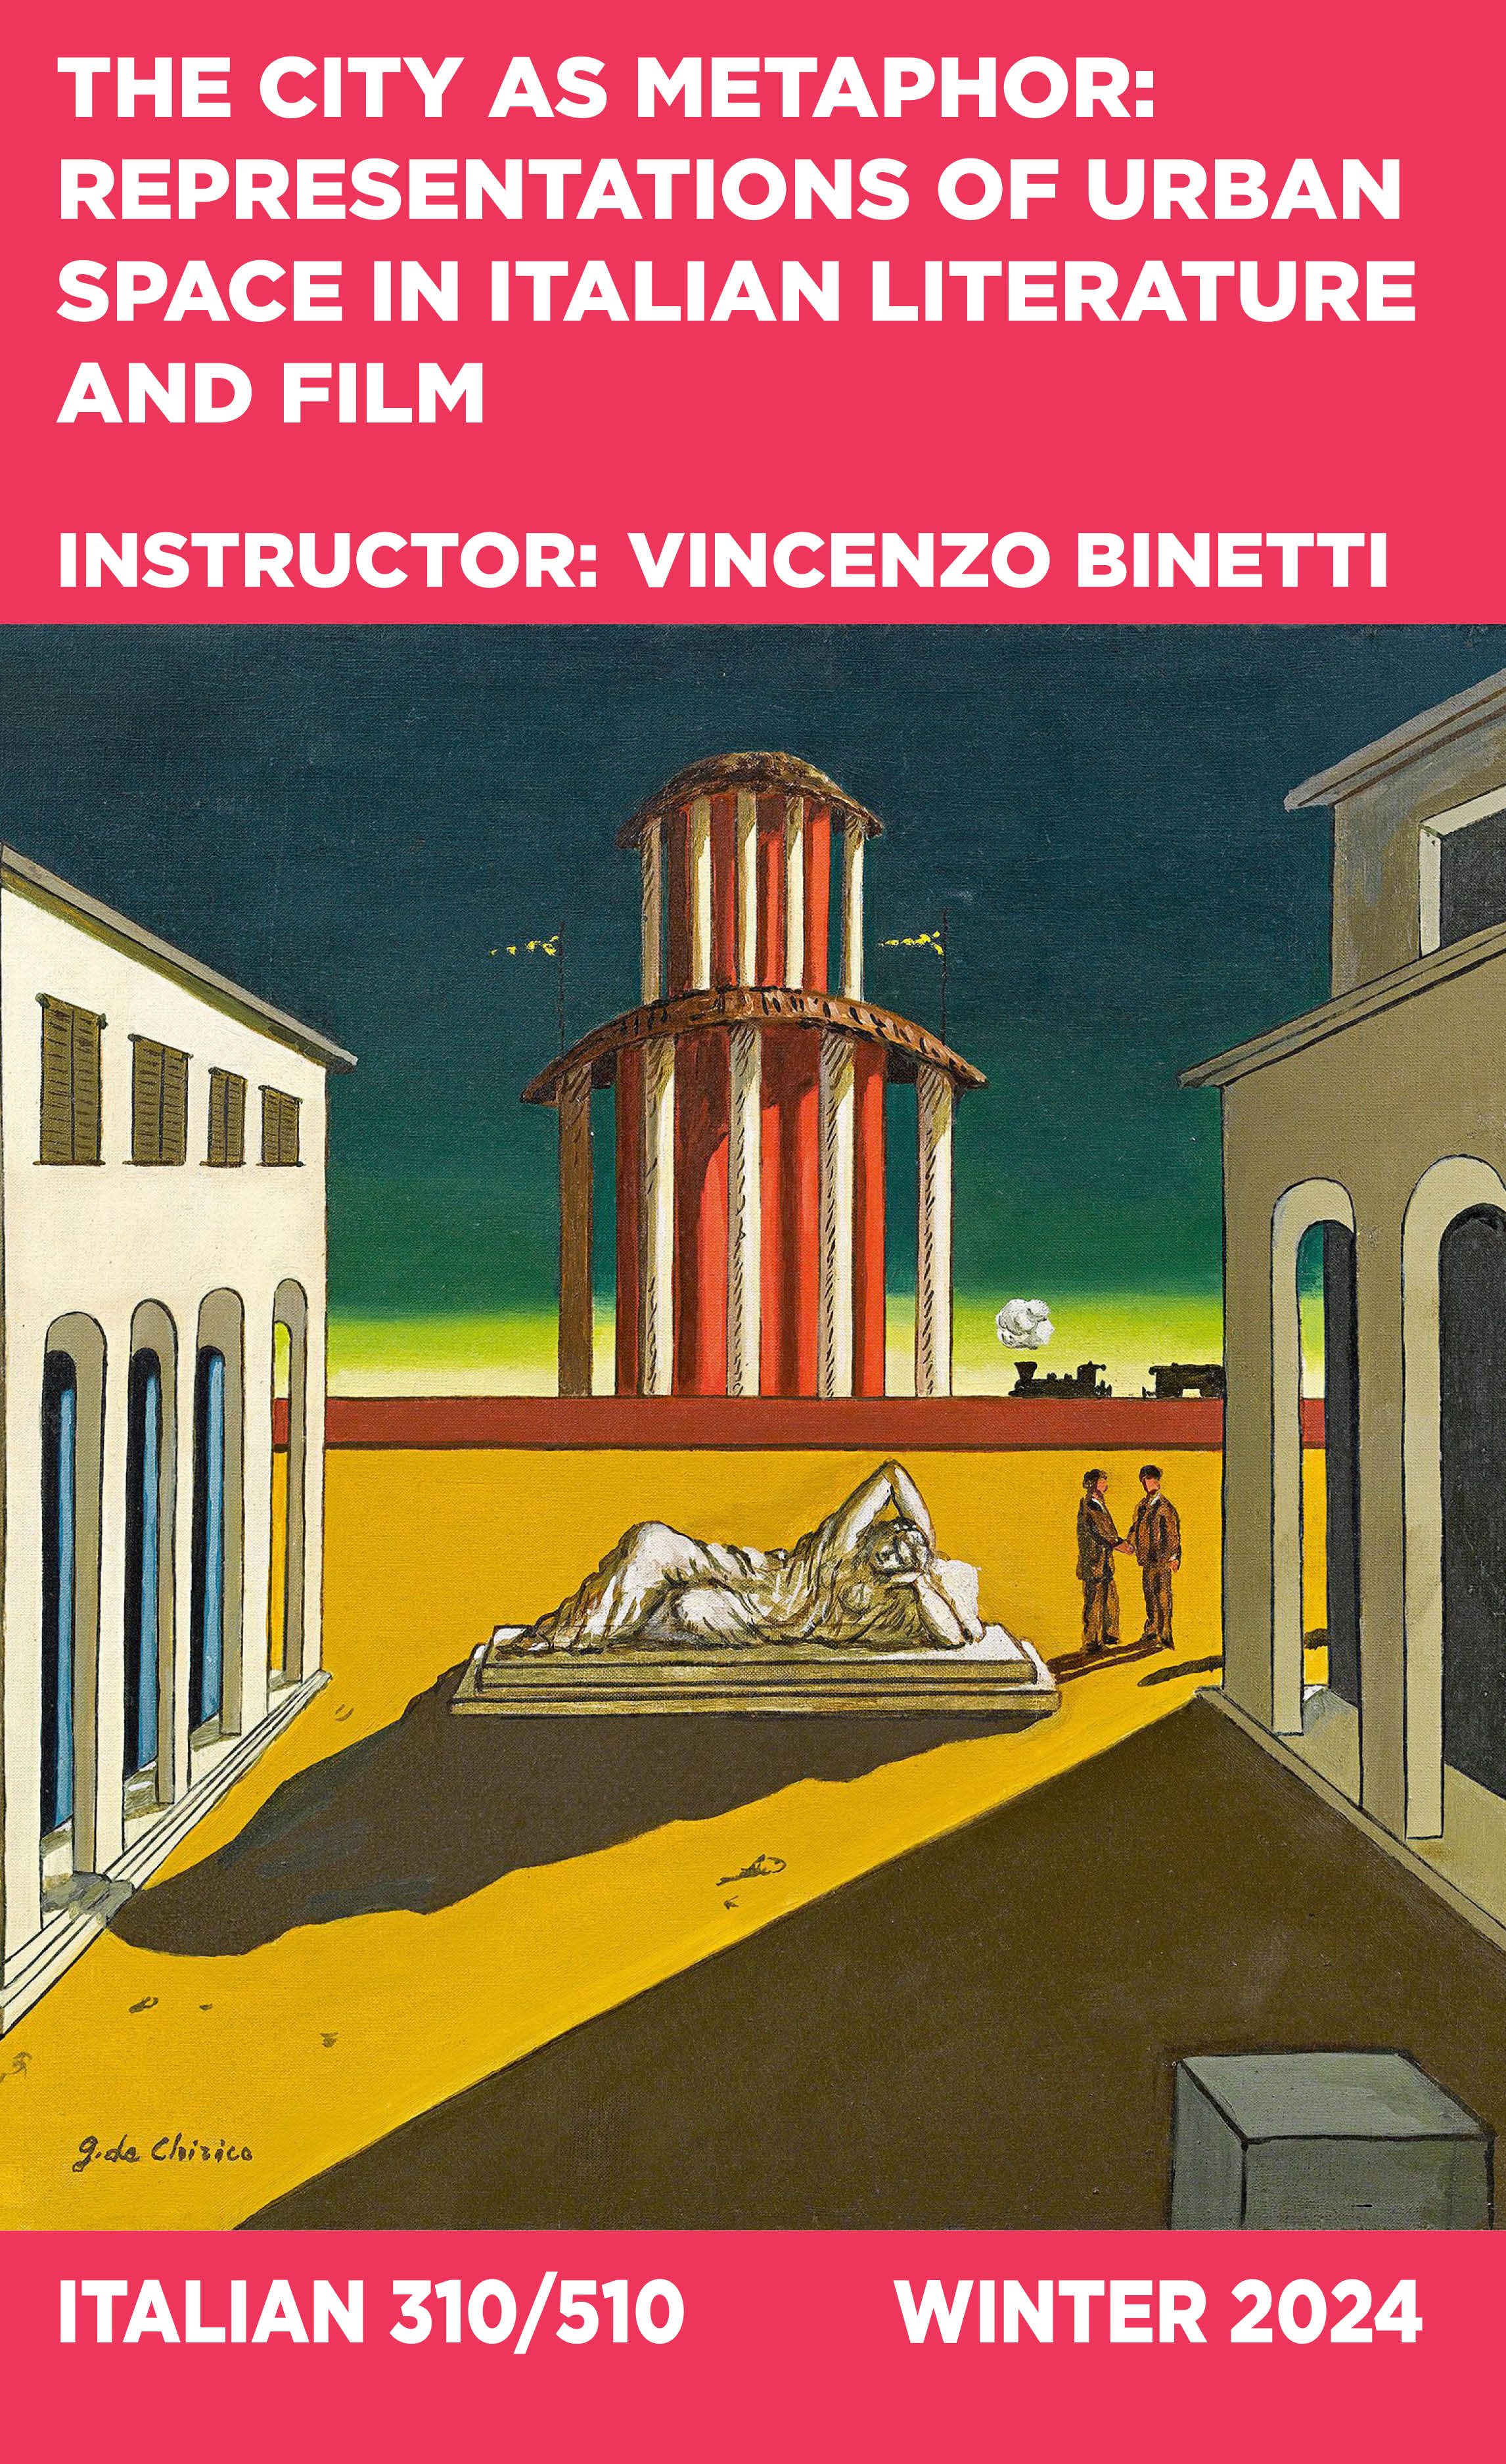 The City as a Metaphor: Representations of Urban Space in Italian Literature and Film, Instructor: Vincenzo Binetti, Italian 310/510